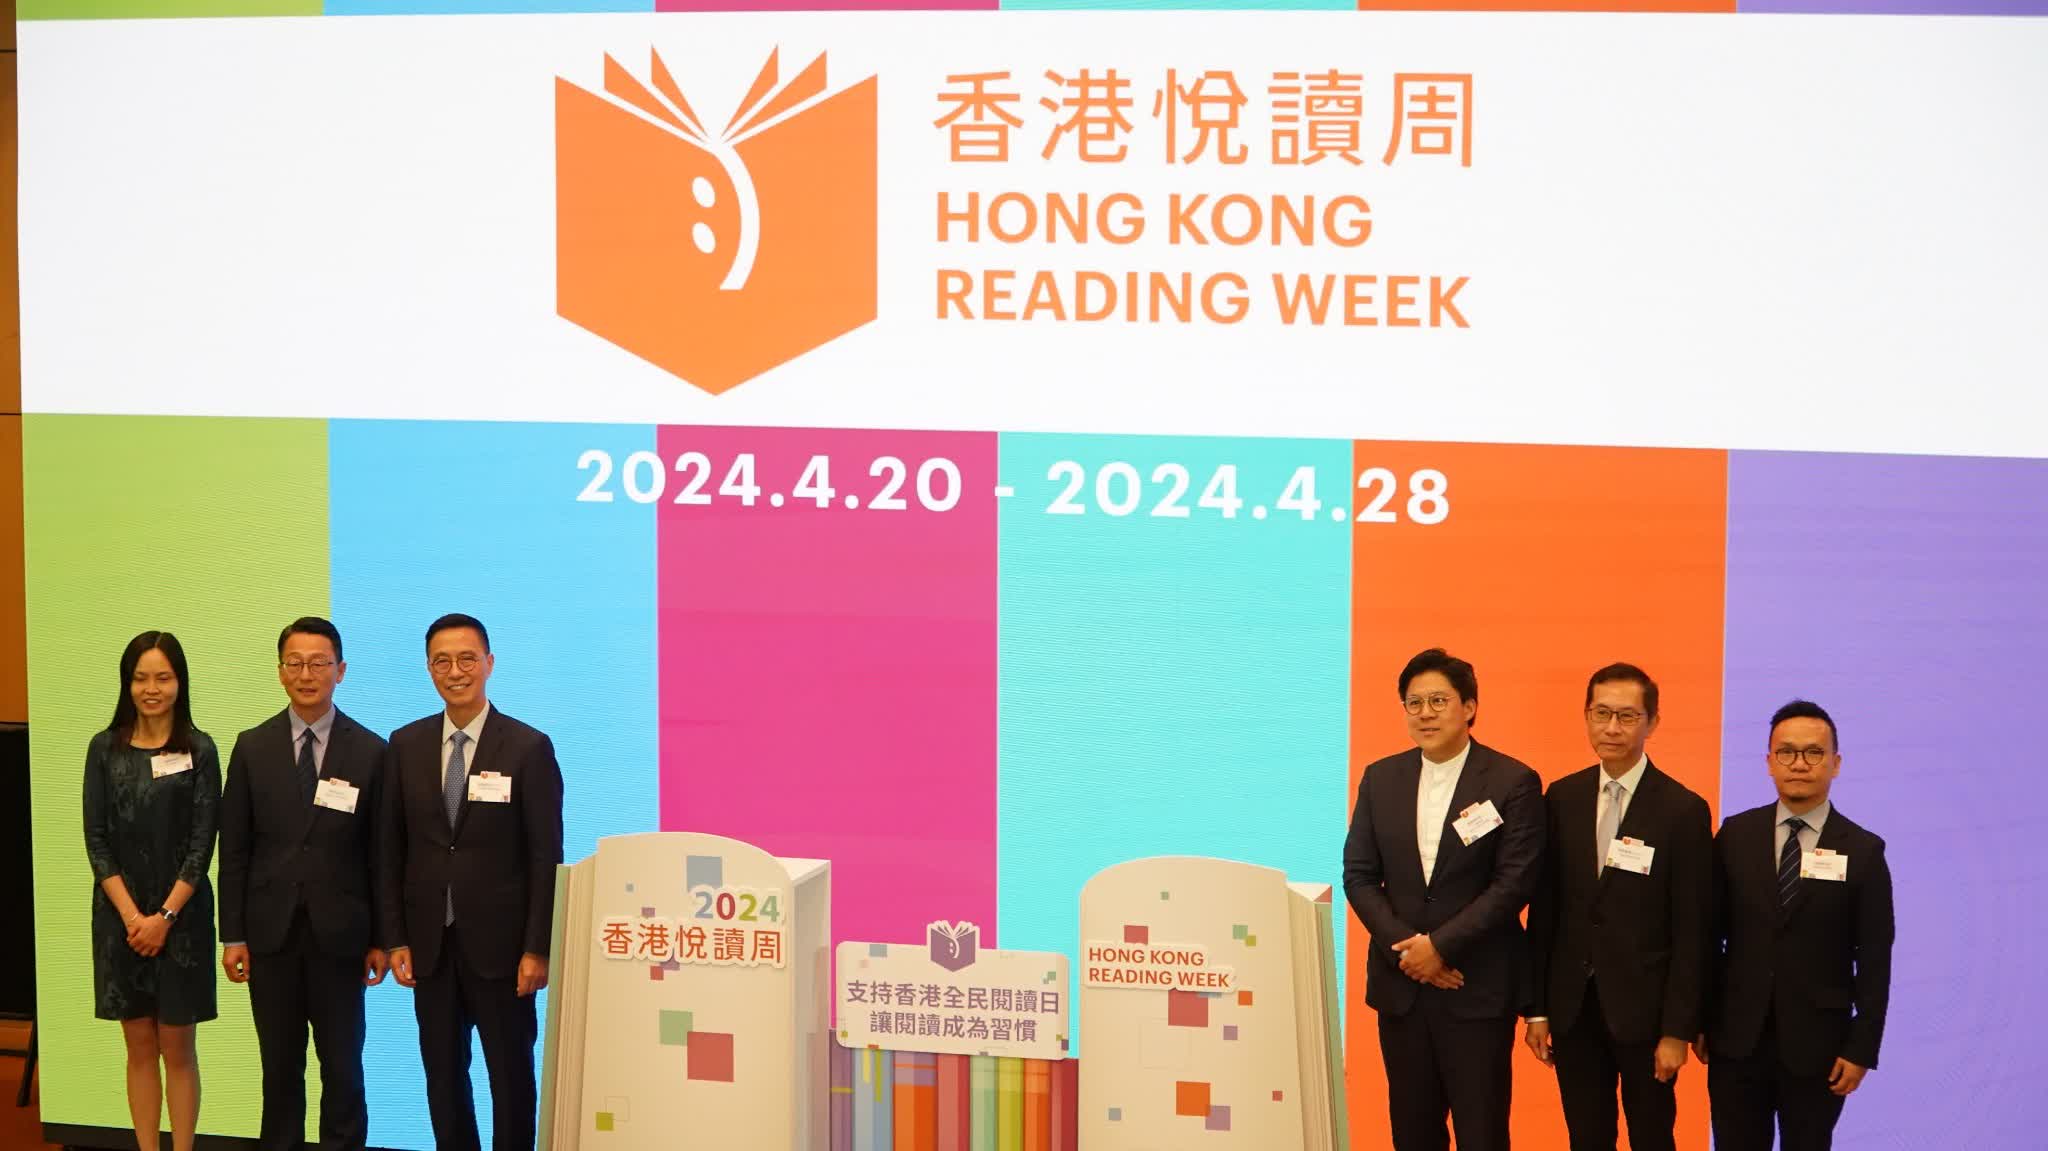 Reading matters! Hong Kong Reading Week Fun Day to be held this weekend